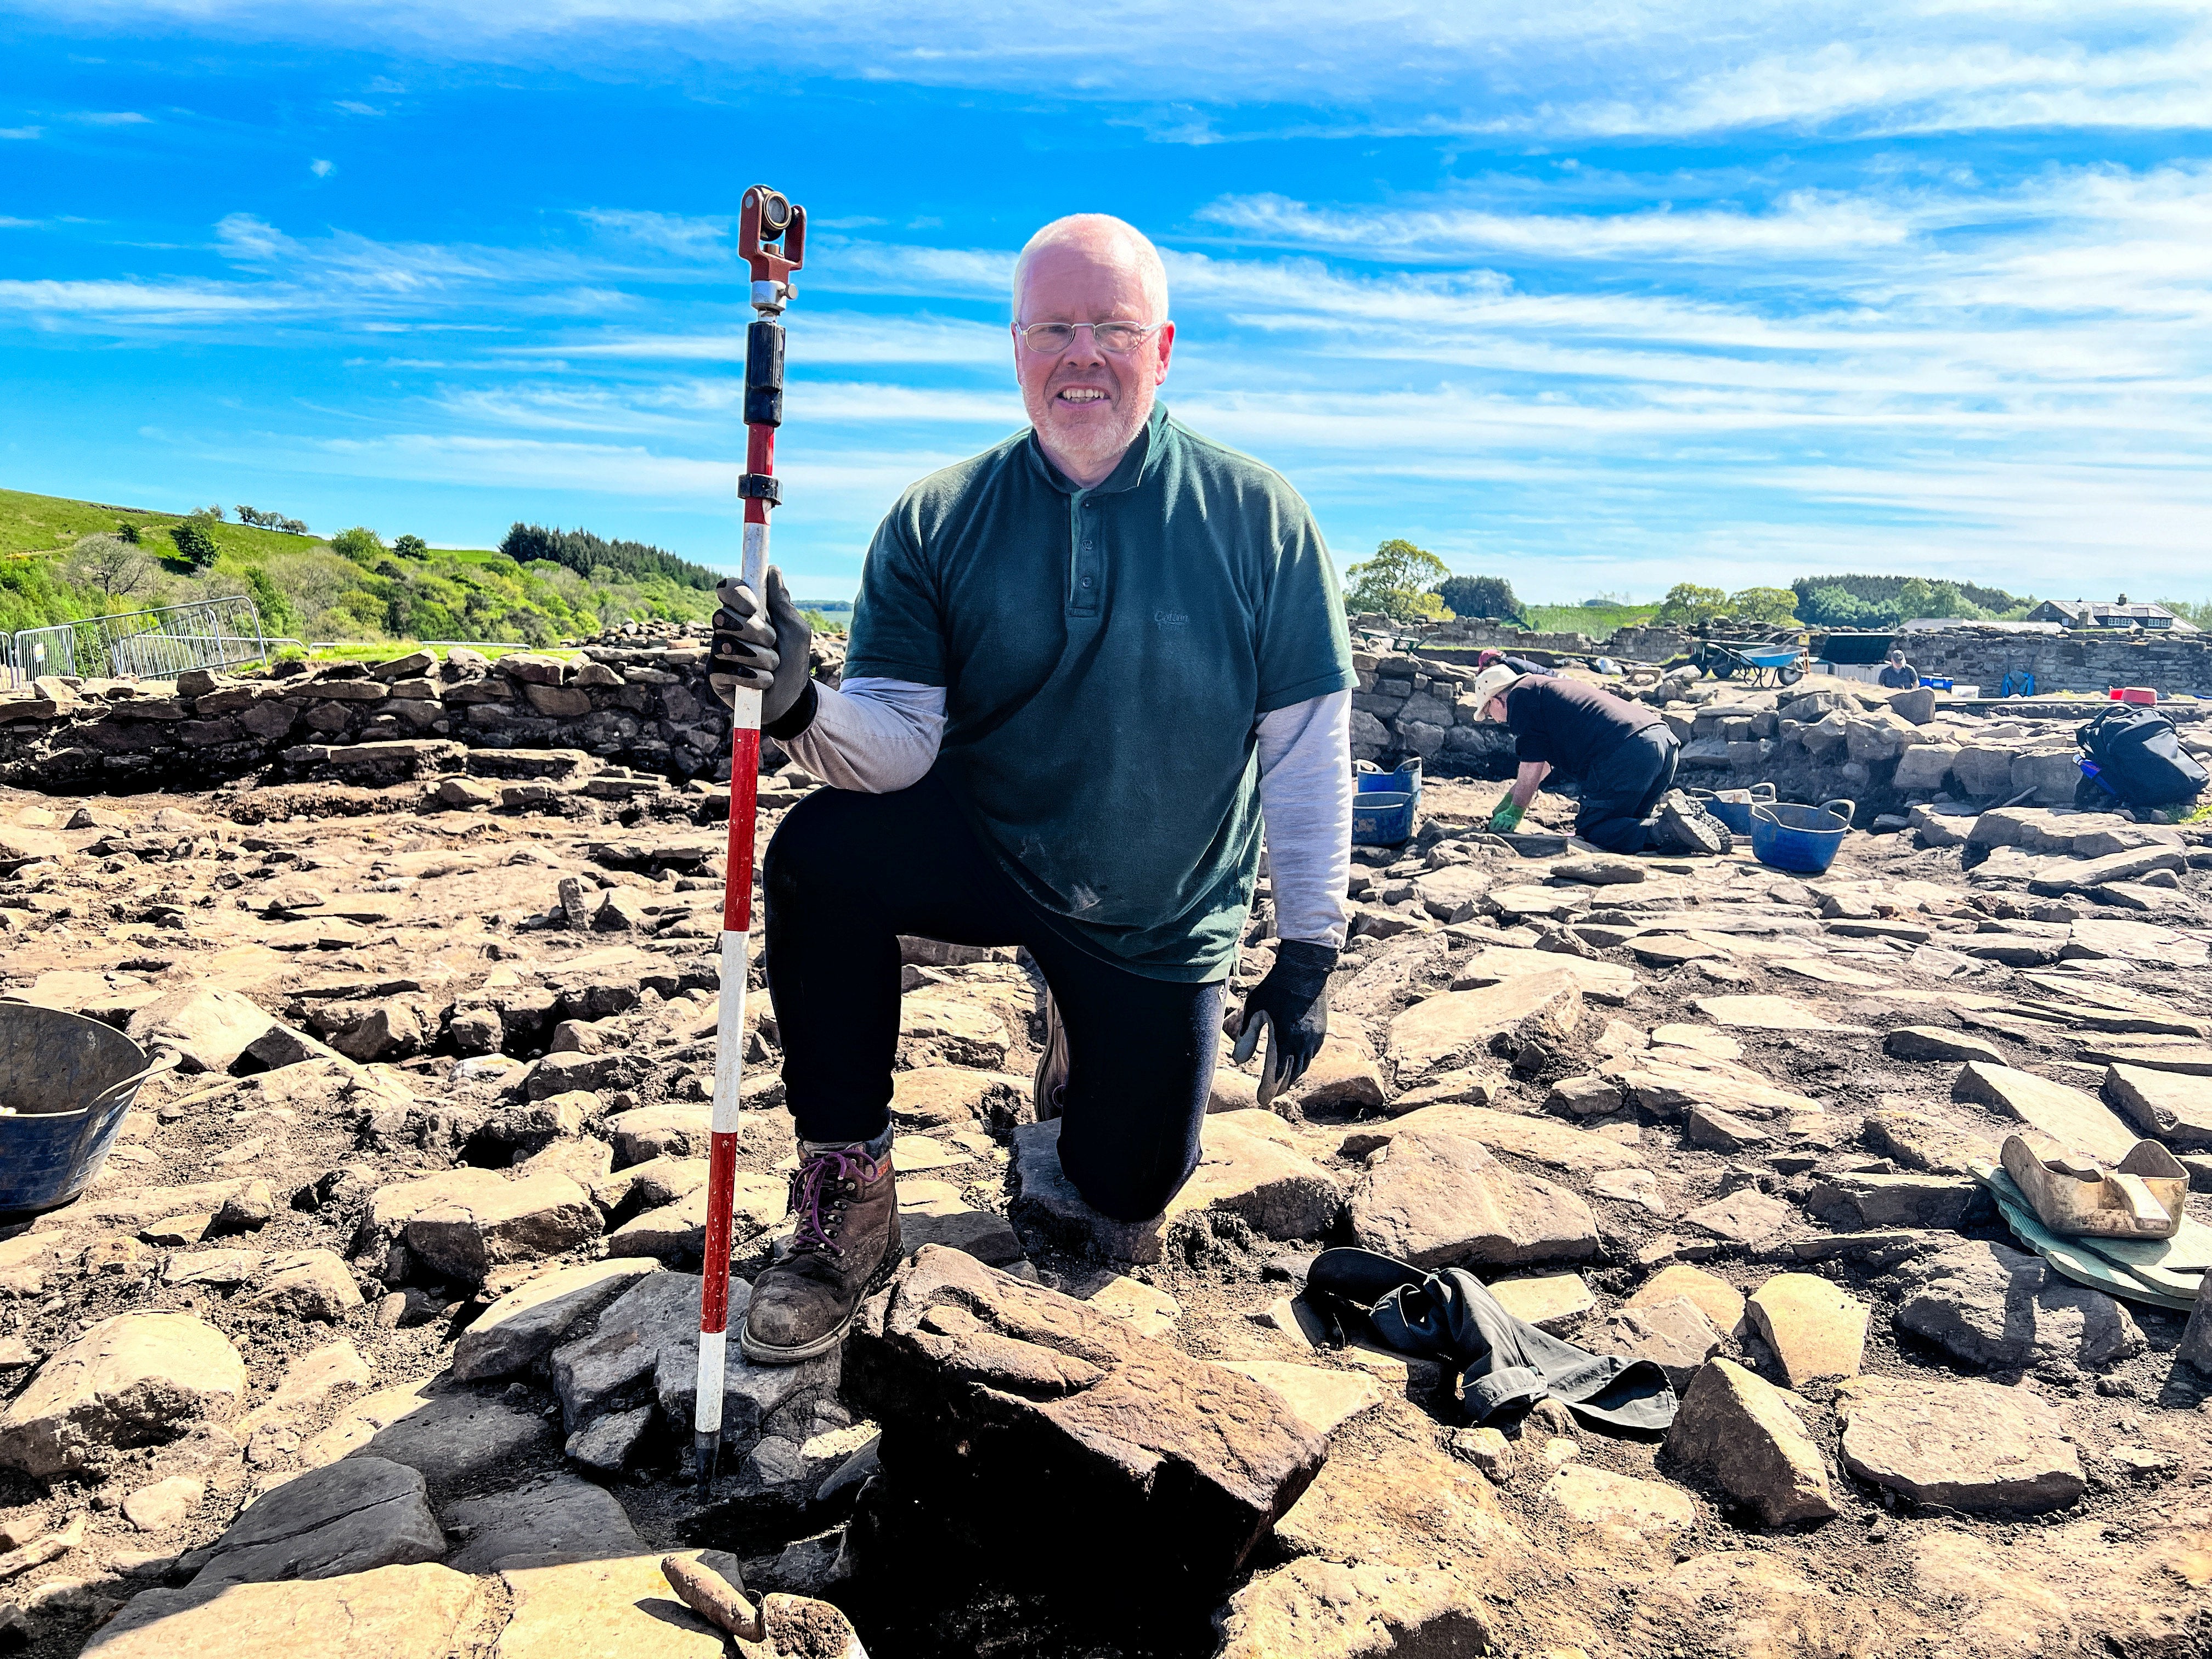 Retired Biochemist Dylan Herbert, from South Wales, made the discovery on 19 May during his second week volunteering on the excavations at the site